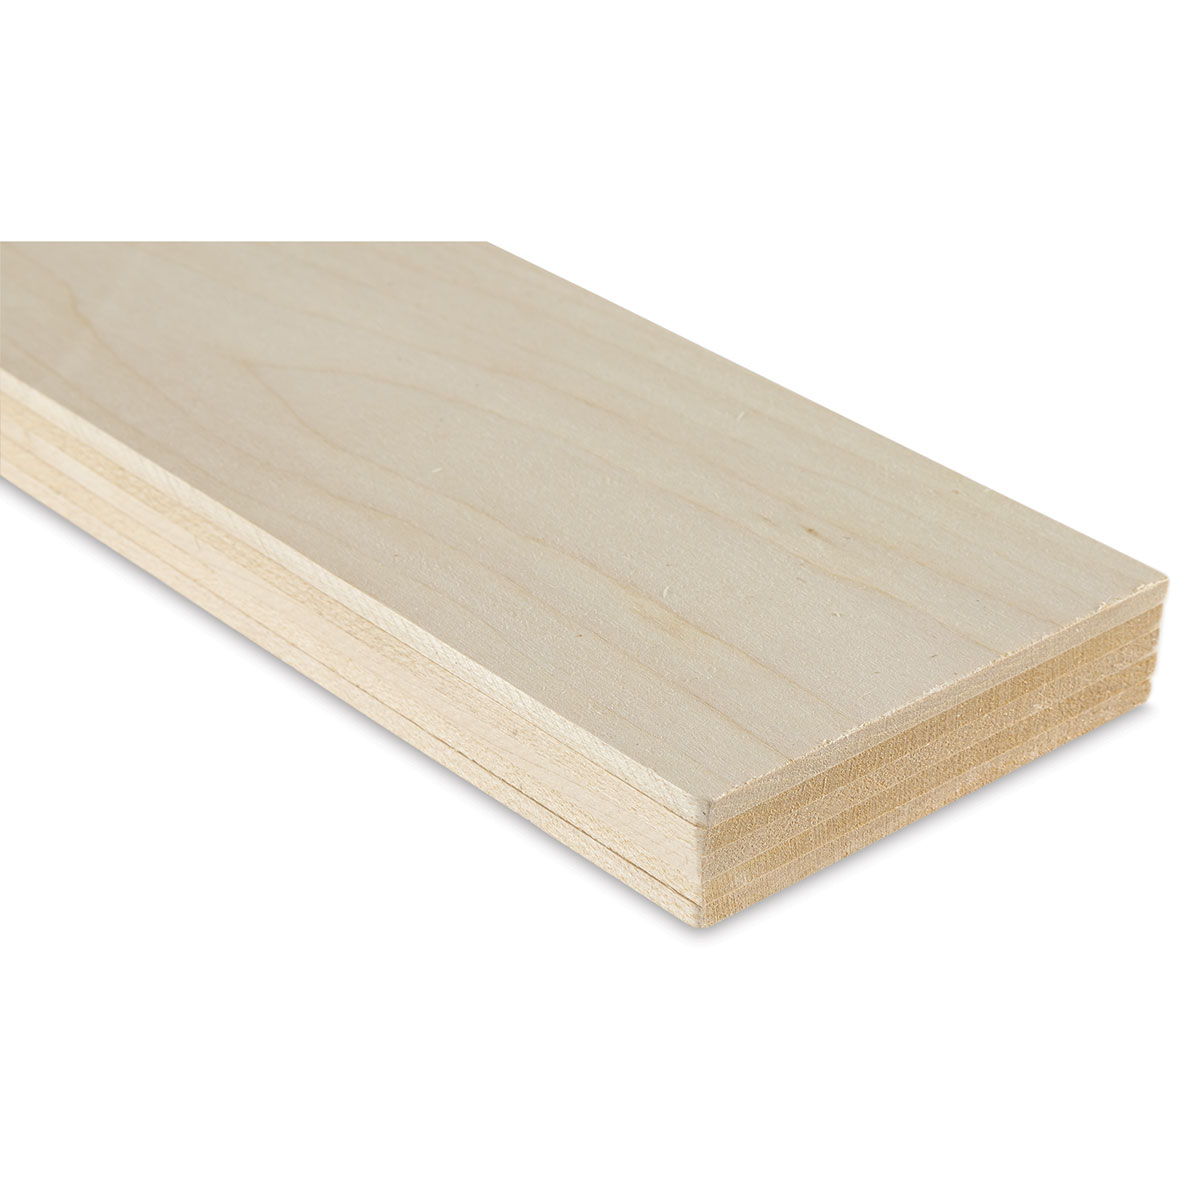 Midwest Products - 3/16X4X36 Basswood (5) - 5005